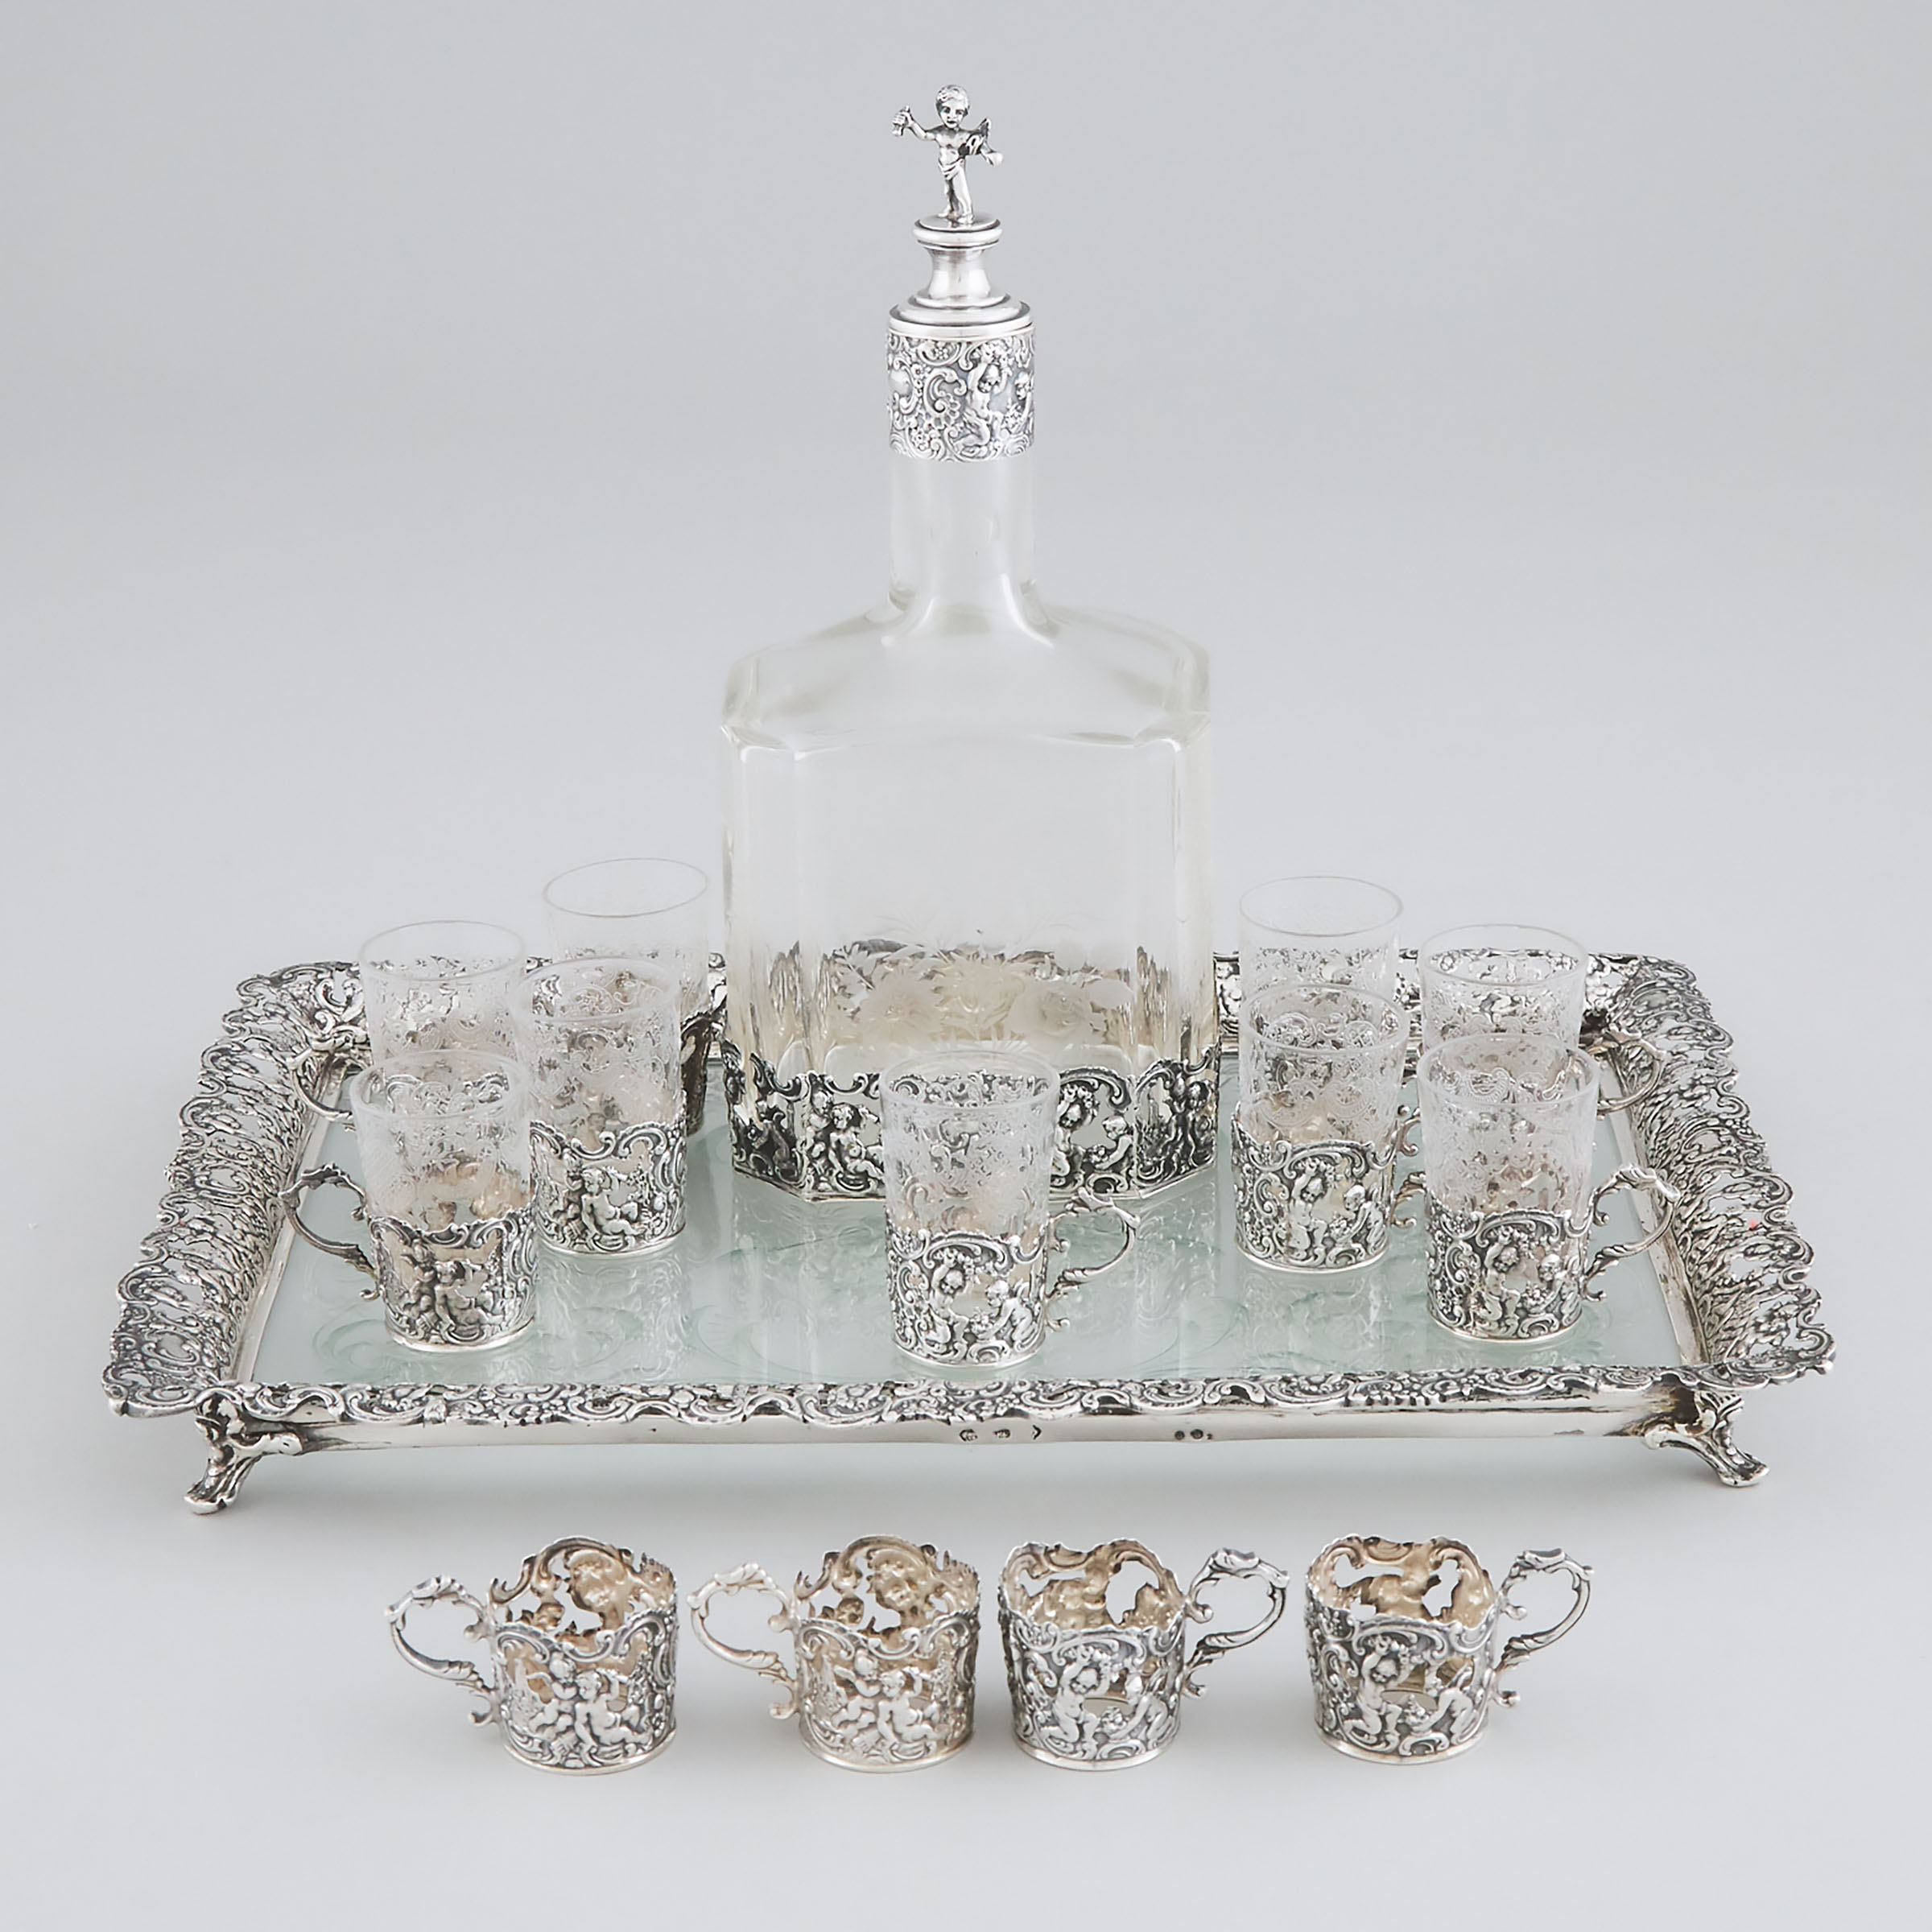 German Silver Mounted Etched Glass Liqueur Set, J.D. Schleissner & Söhne, Hanau, early 20th century